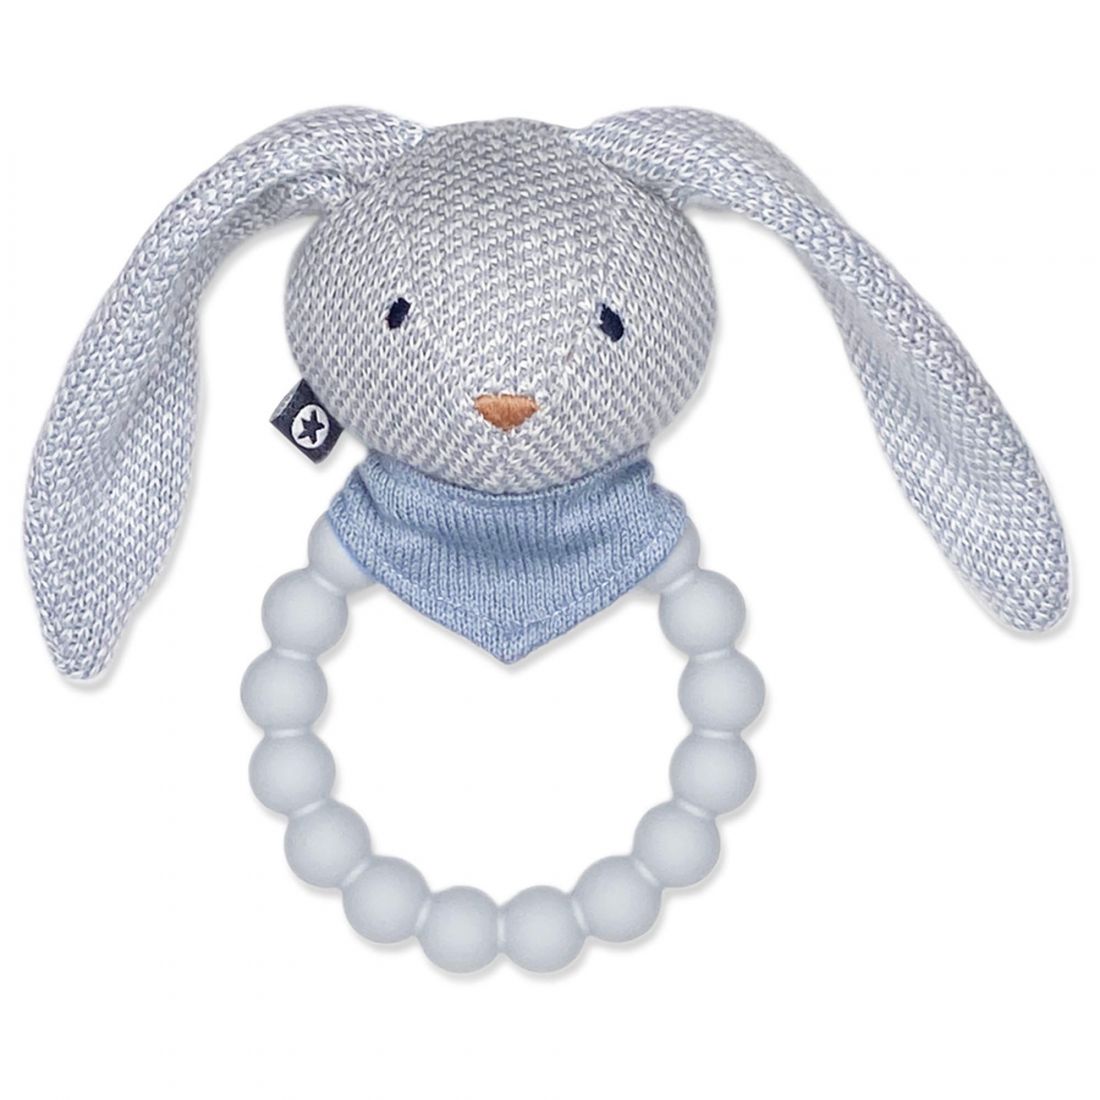 Small Stuff Rattle, silicone ring with knitted bunny, light blue
